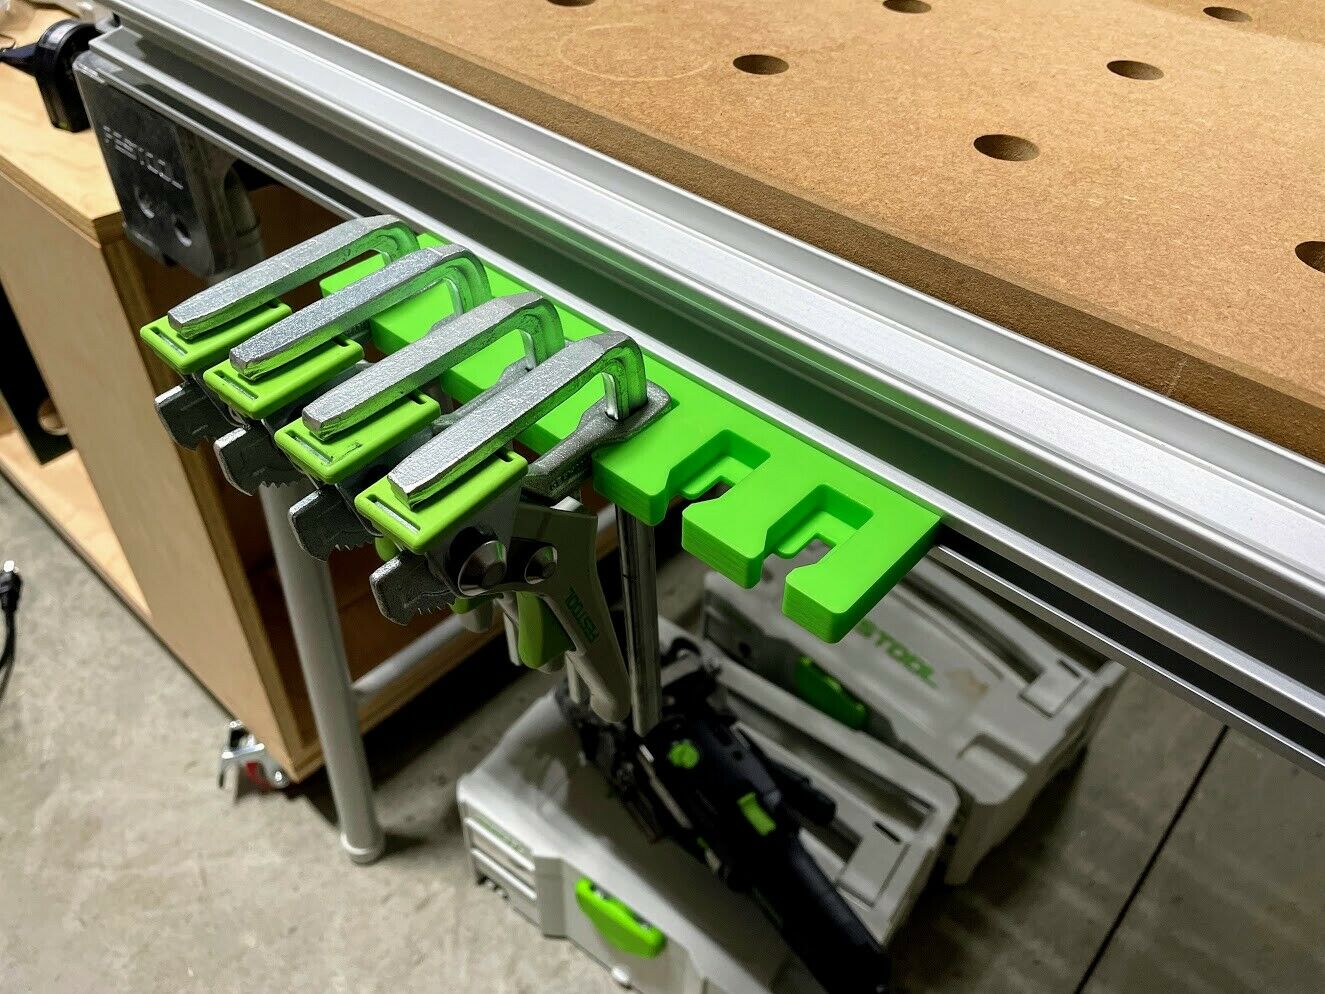 Bench Dog Holder and Pencil tray Utility Rack for MFT3 Festool Clamp Rack x6